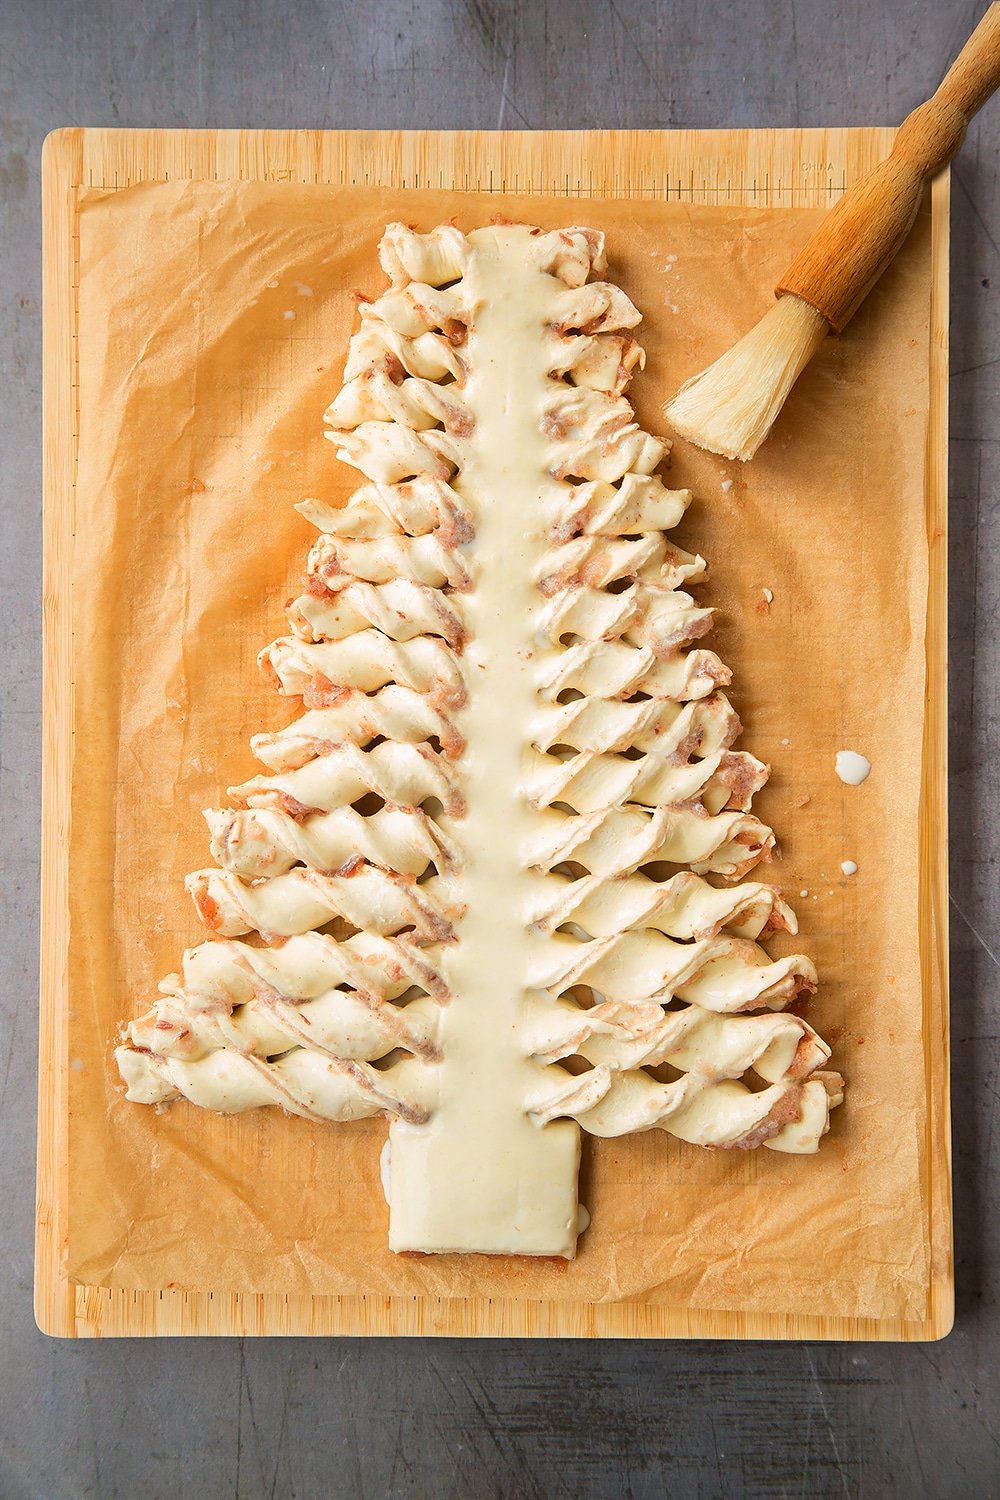 Brush your puff pastry Christmas tree with milk